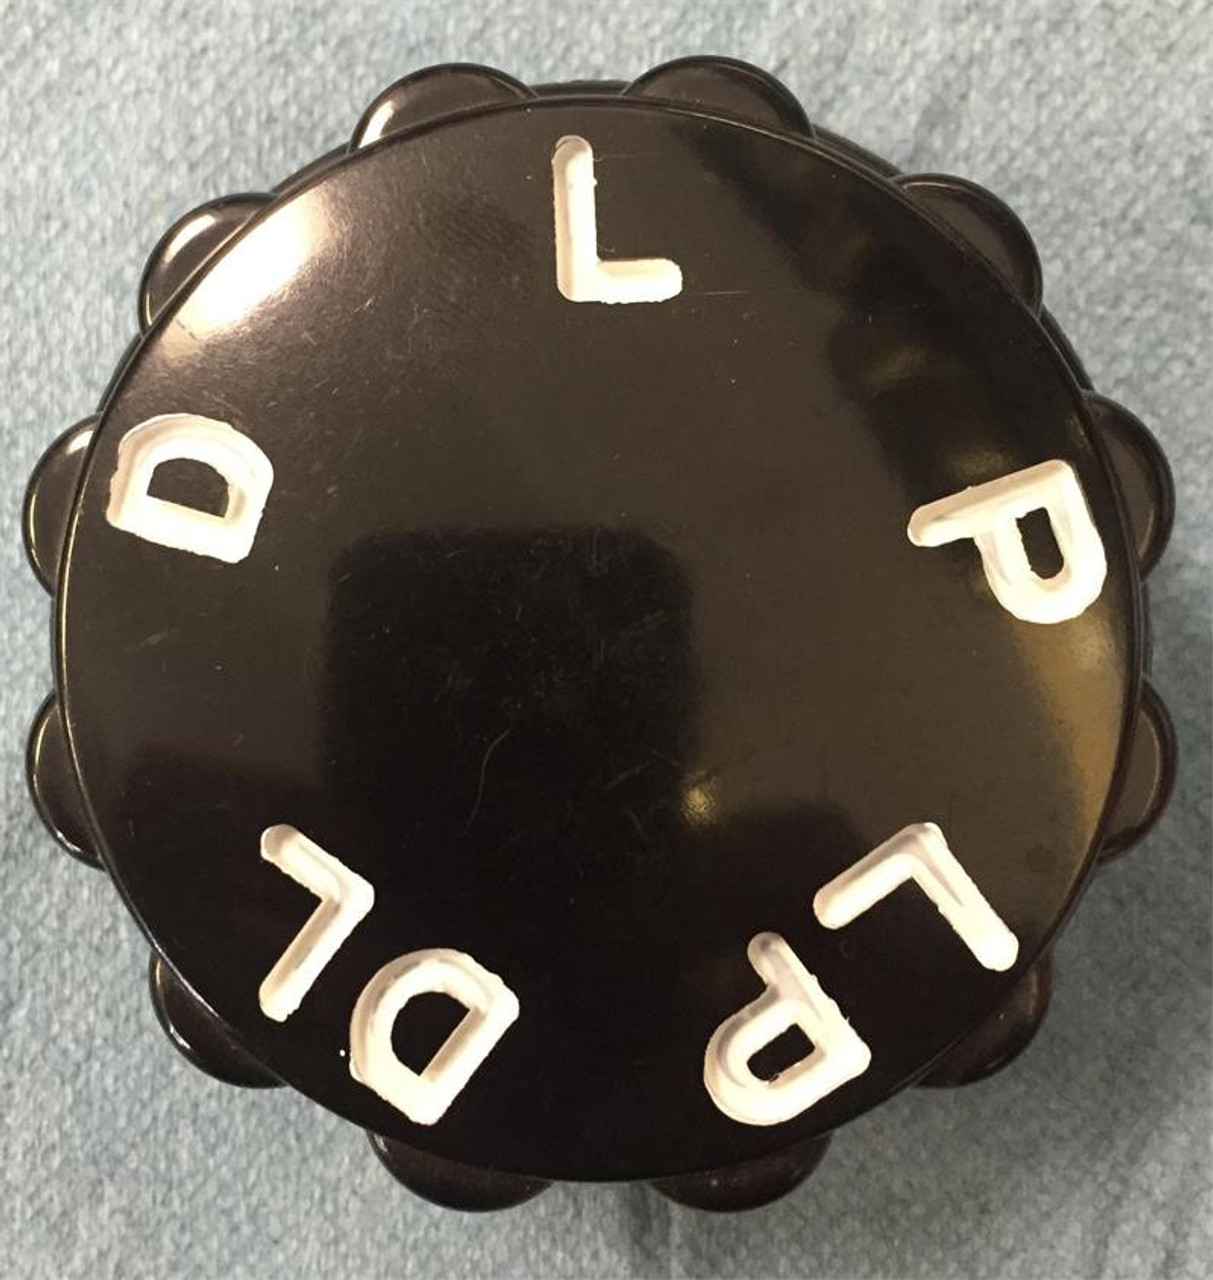 Looking for a Zenith 420 Dorsal and Lumbar Drop Selector Knob RIGHT SIDE, Zenith Dorsal Drop Selector Knob, Zenith Lumbar Drop Selector Knob, Zenith Drop Selector Knob, Zenith Selector Knob, Zenith Drop Knob, Zenith Table Knob, Zenith Knob?